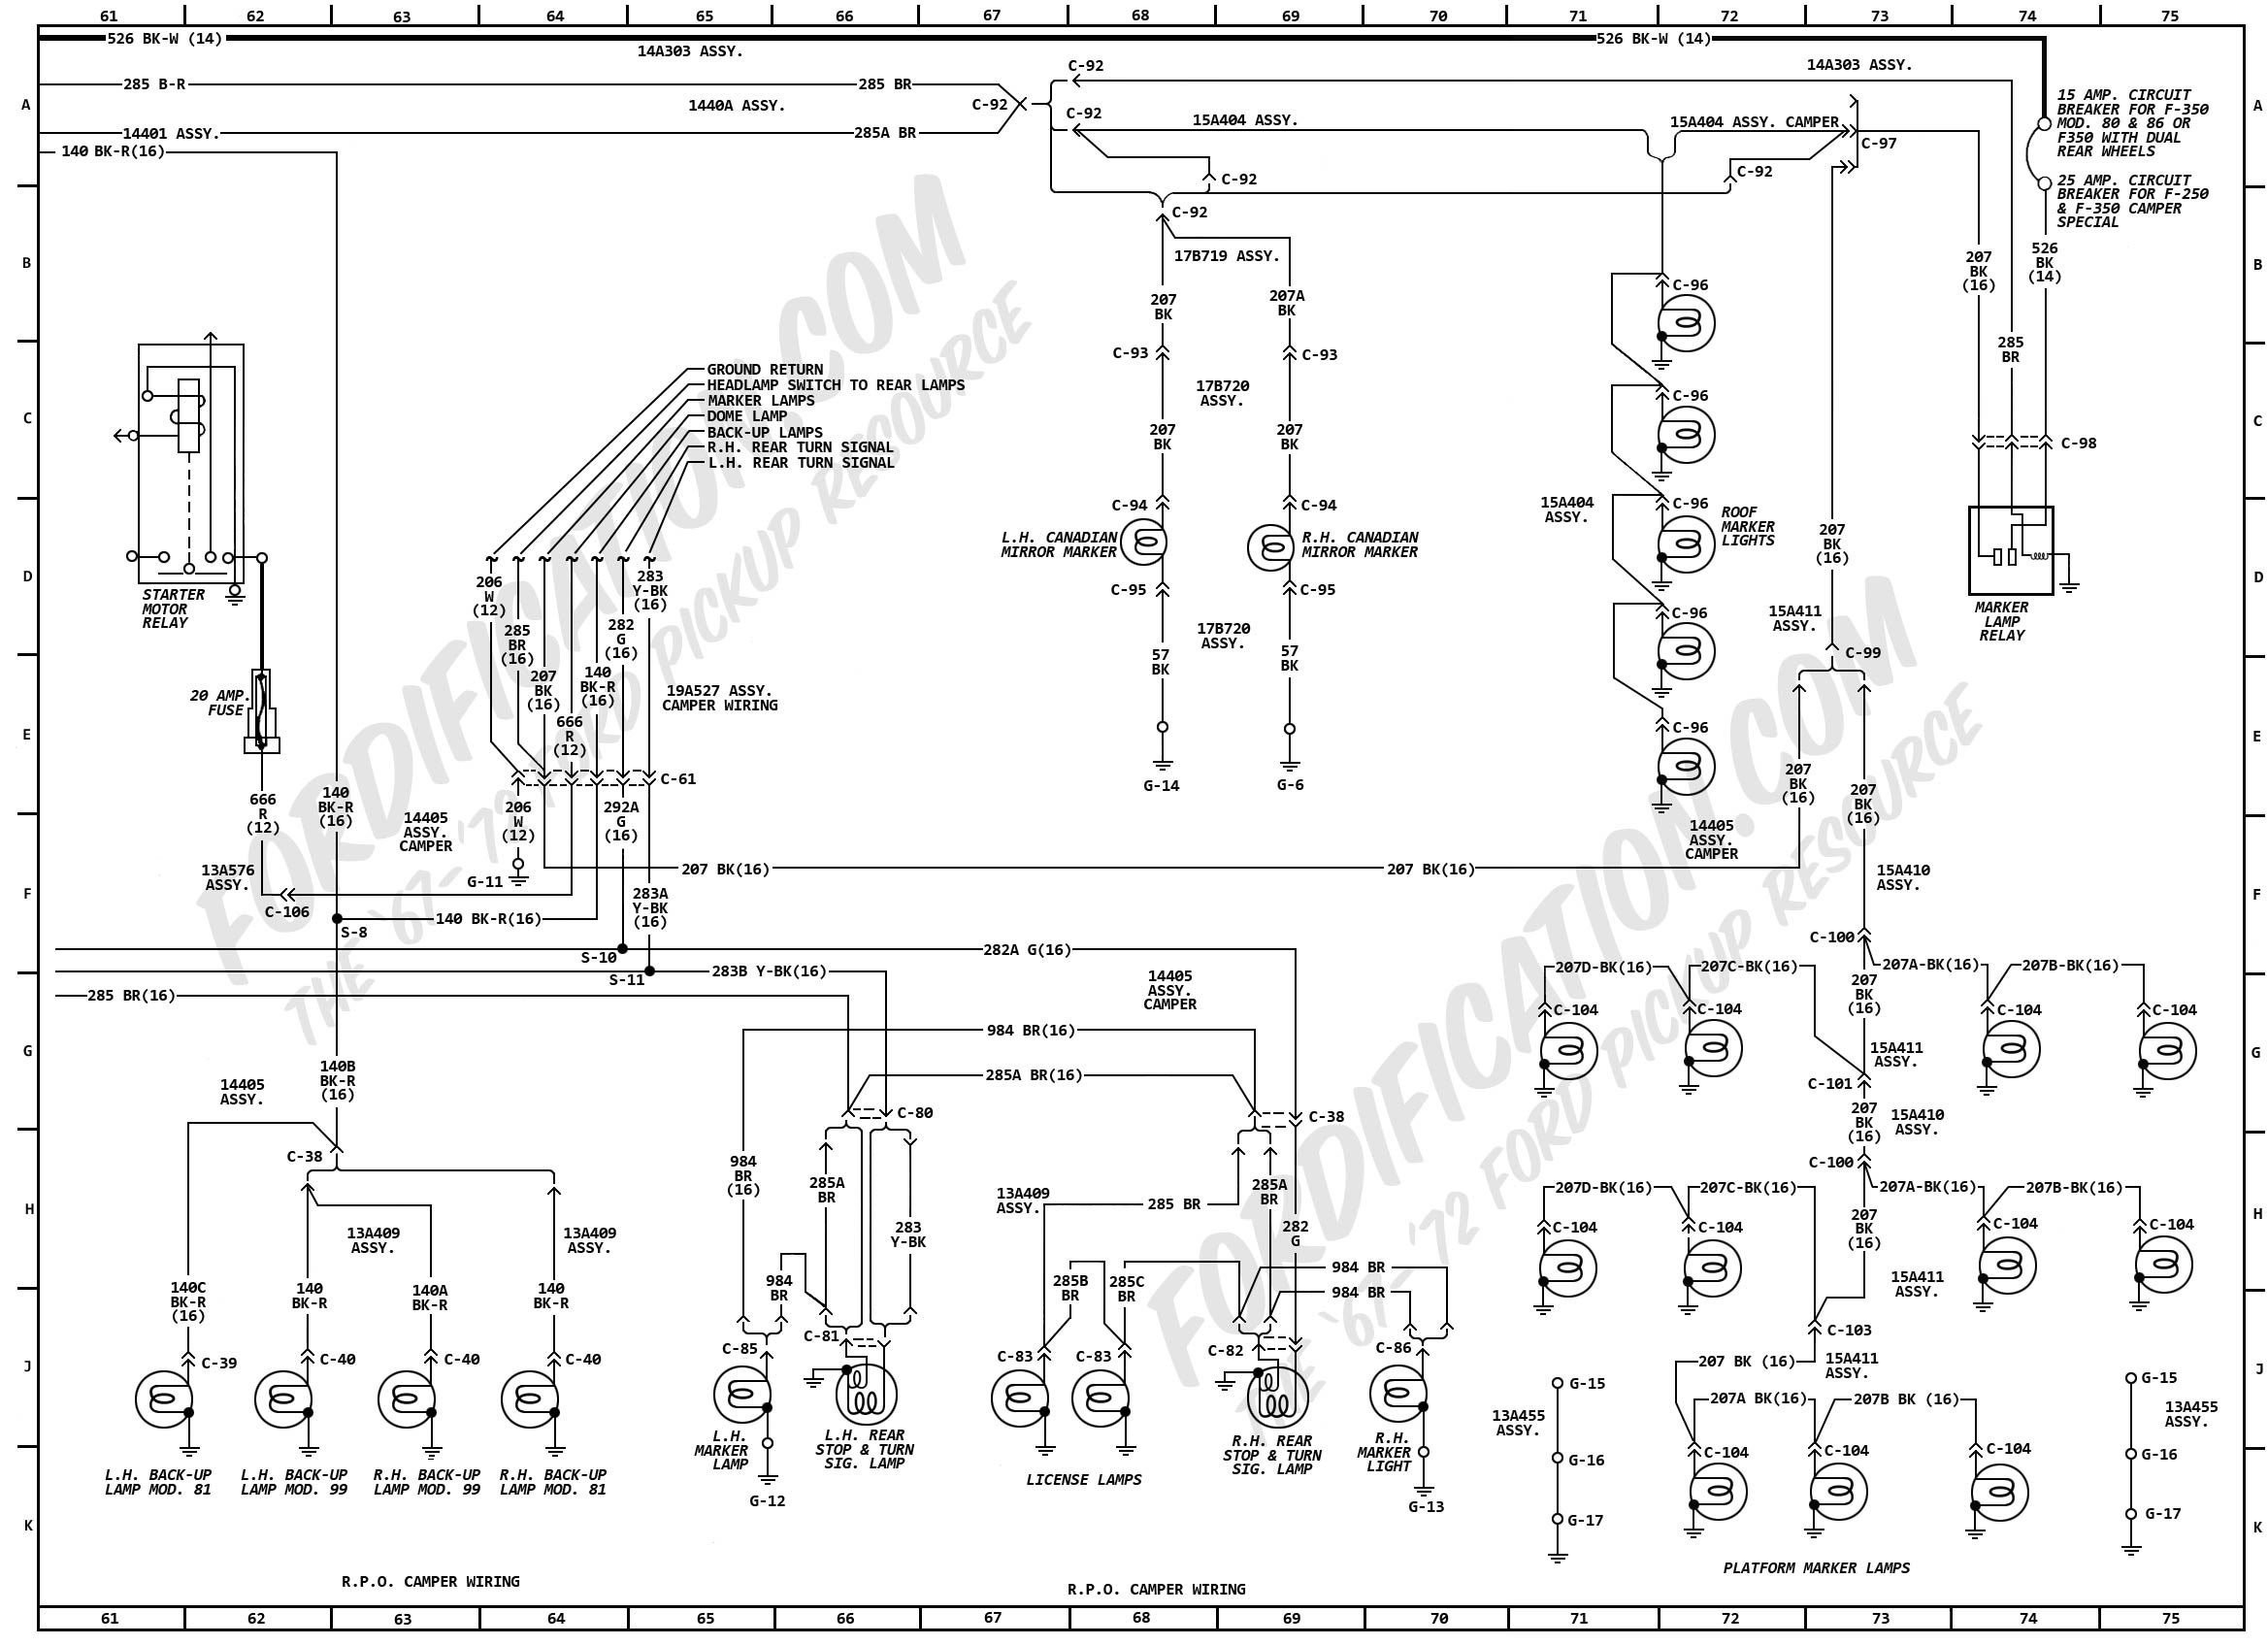 1968 Ford F100 Wiring Diagram from www.fordification.com